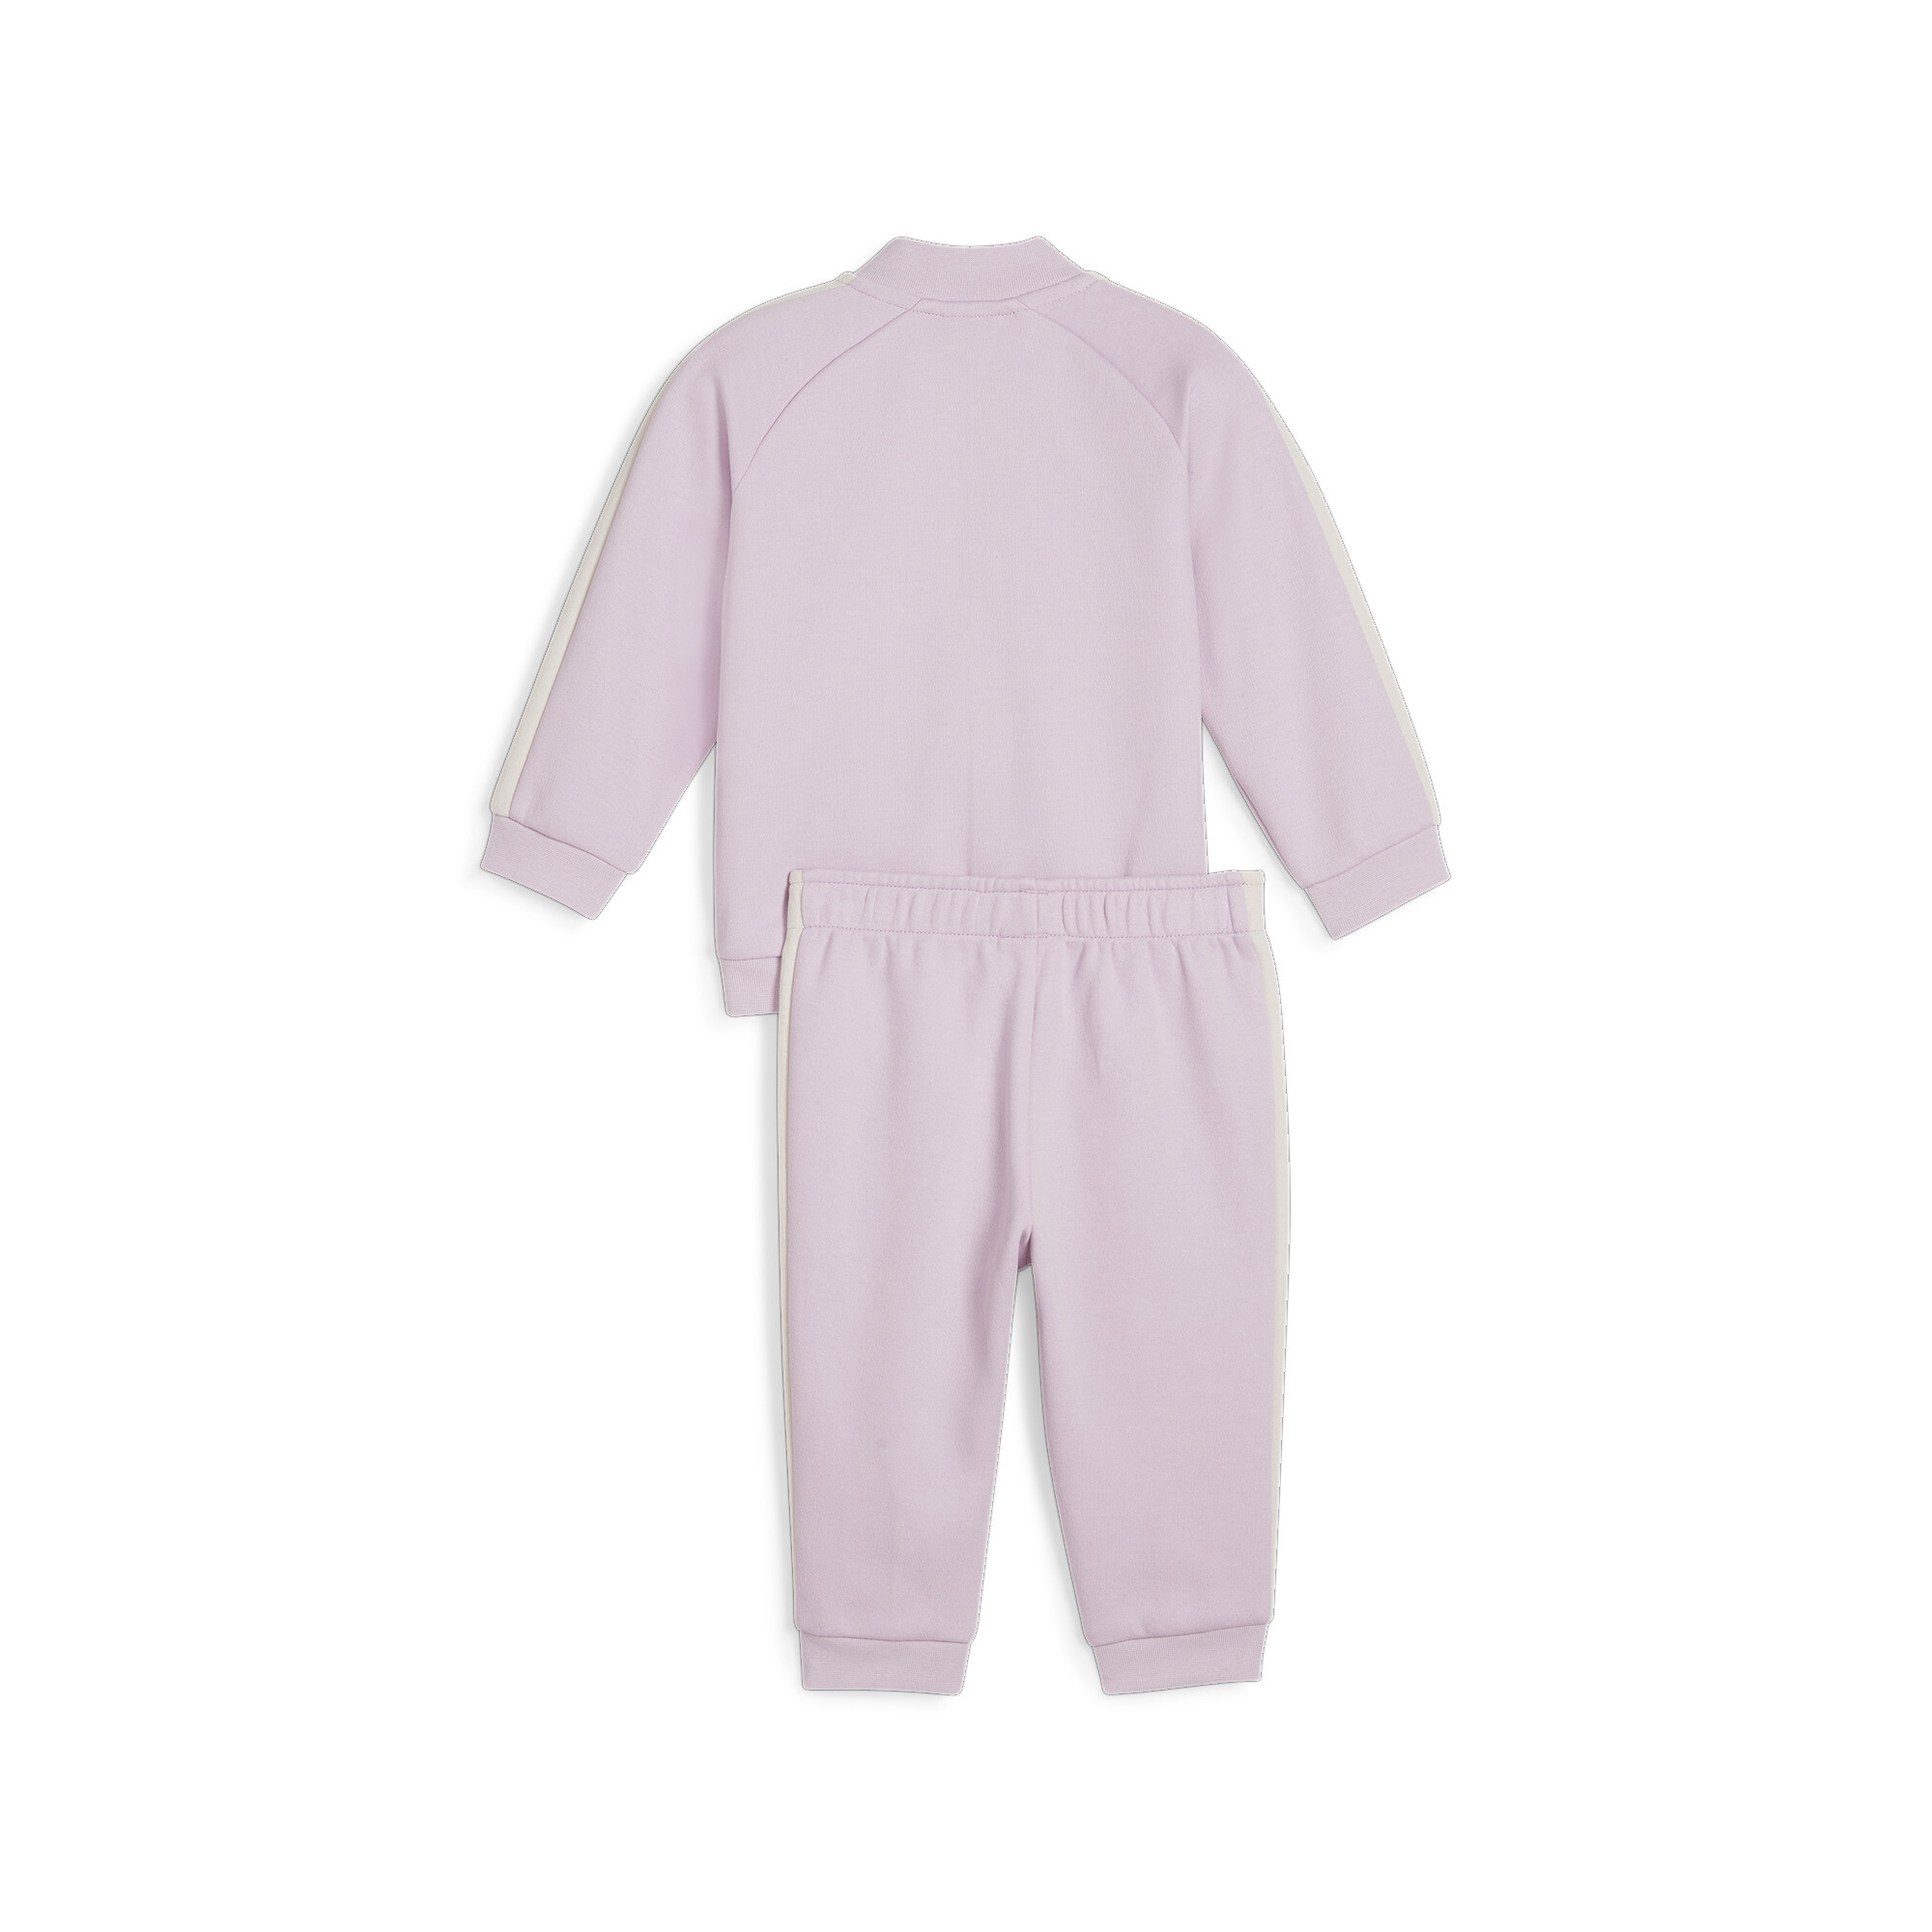 Kids' PUMA MINICATS T7 ICONIC Baby Tracksuit Set In 90 - Purple, Size 6-9 Months